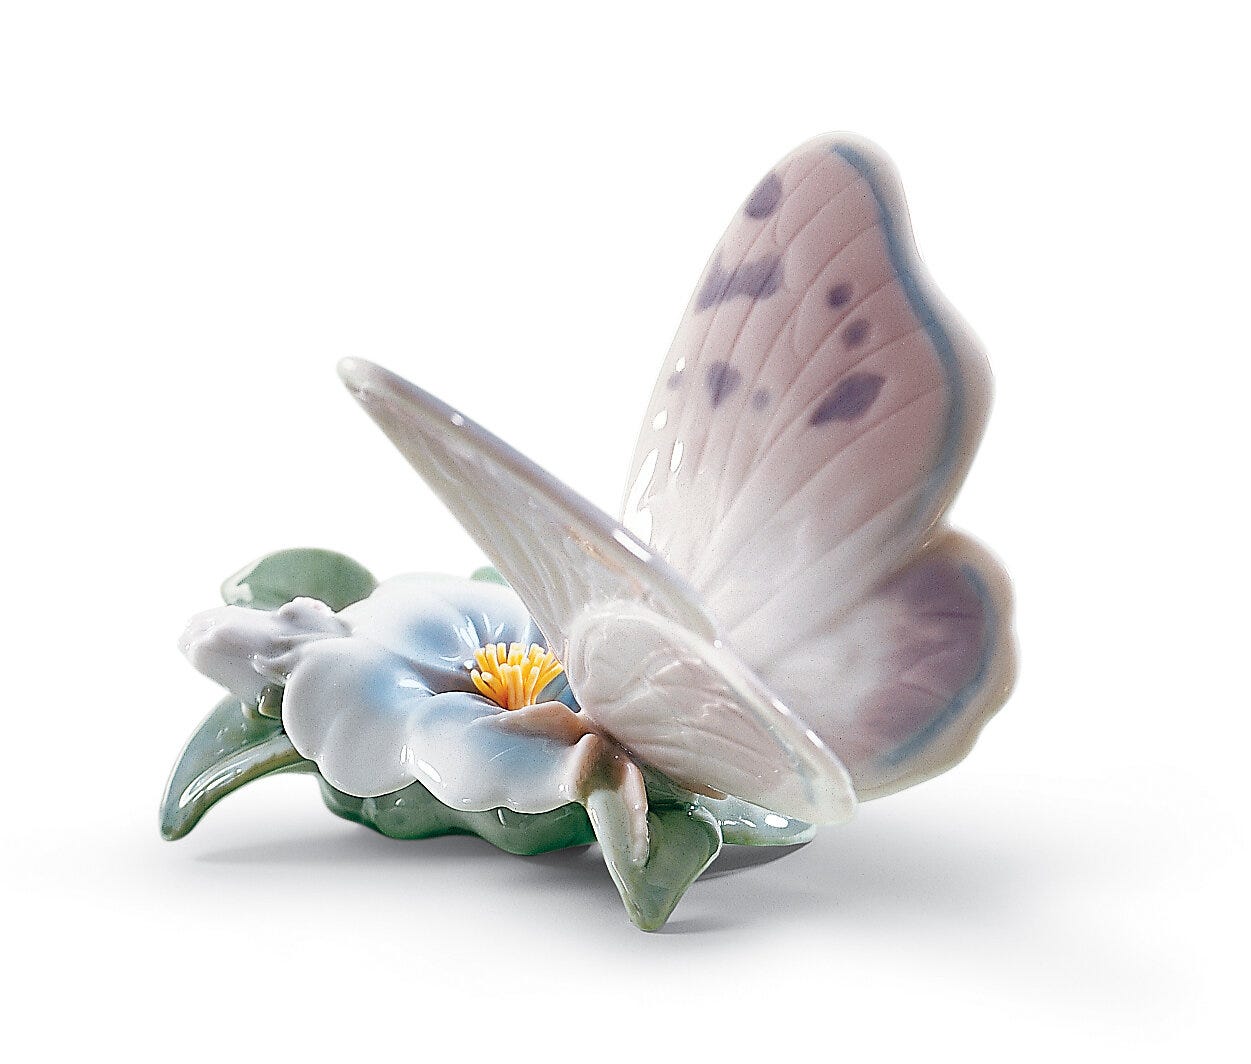 Refreshing Pause Butterfly Figurine - Lladro-USA